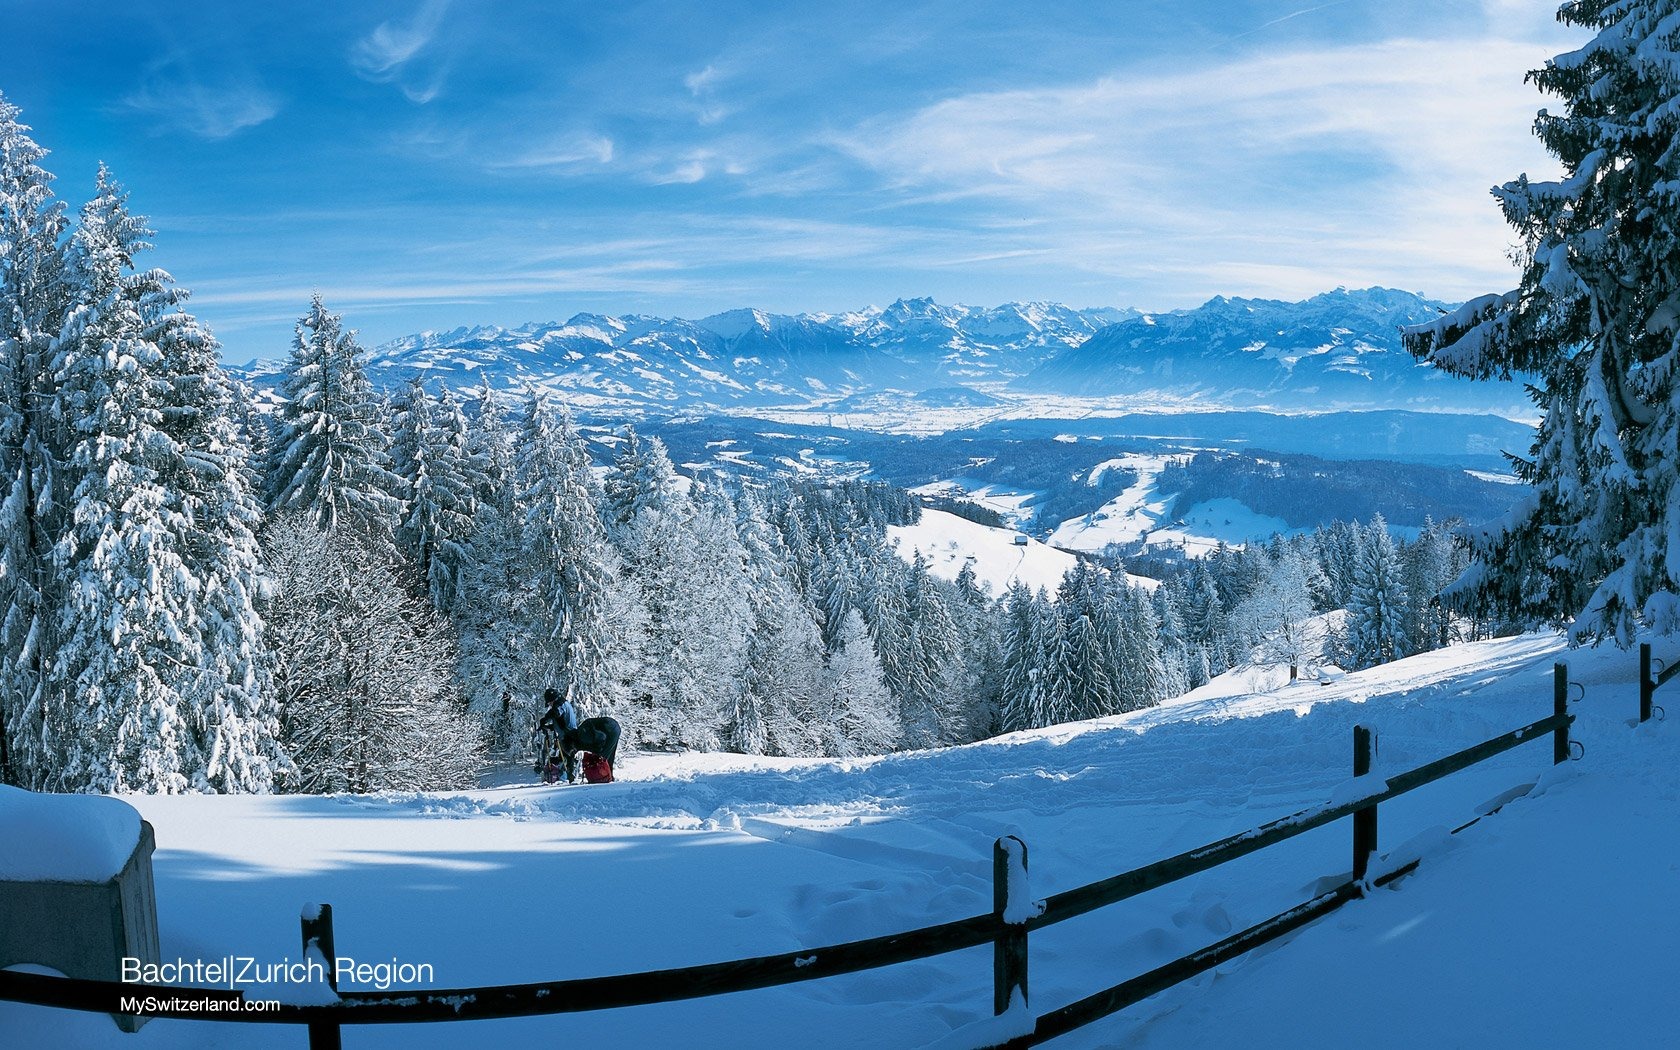 Snow Covered Landscape At Bachtel Switzerland Skiing Holidays